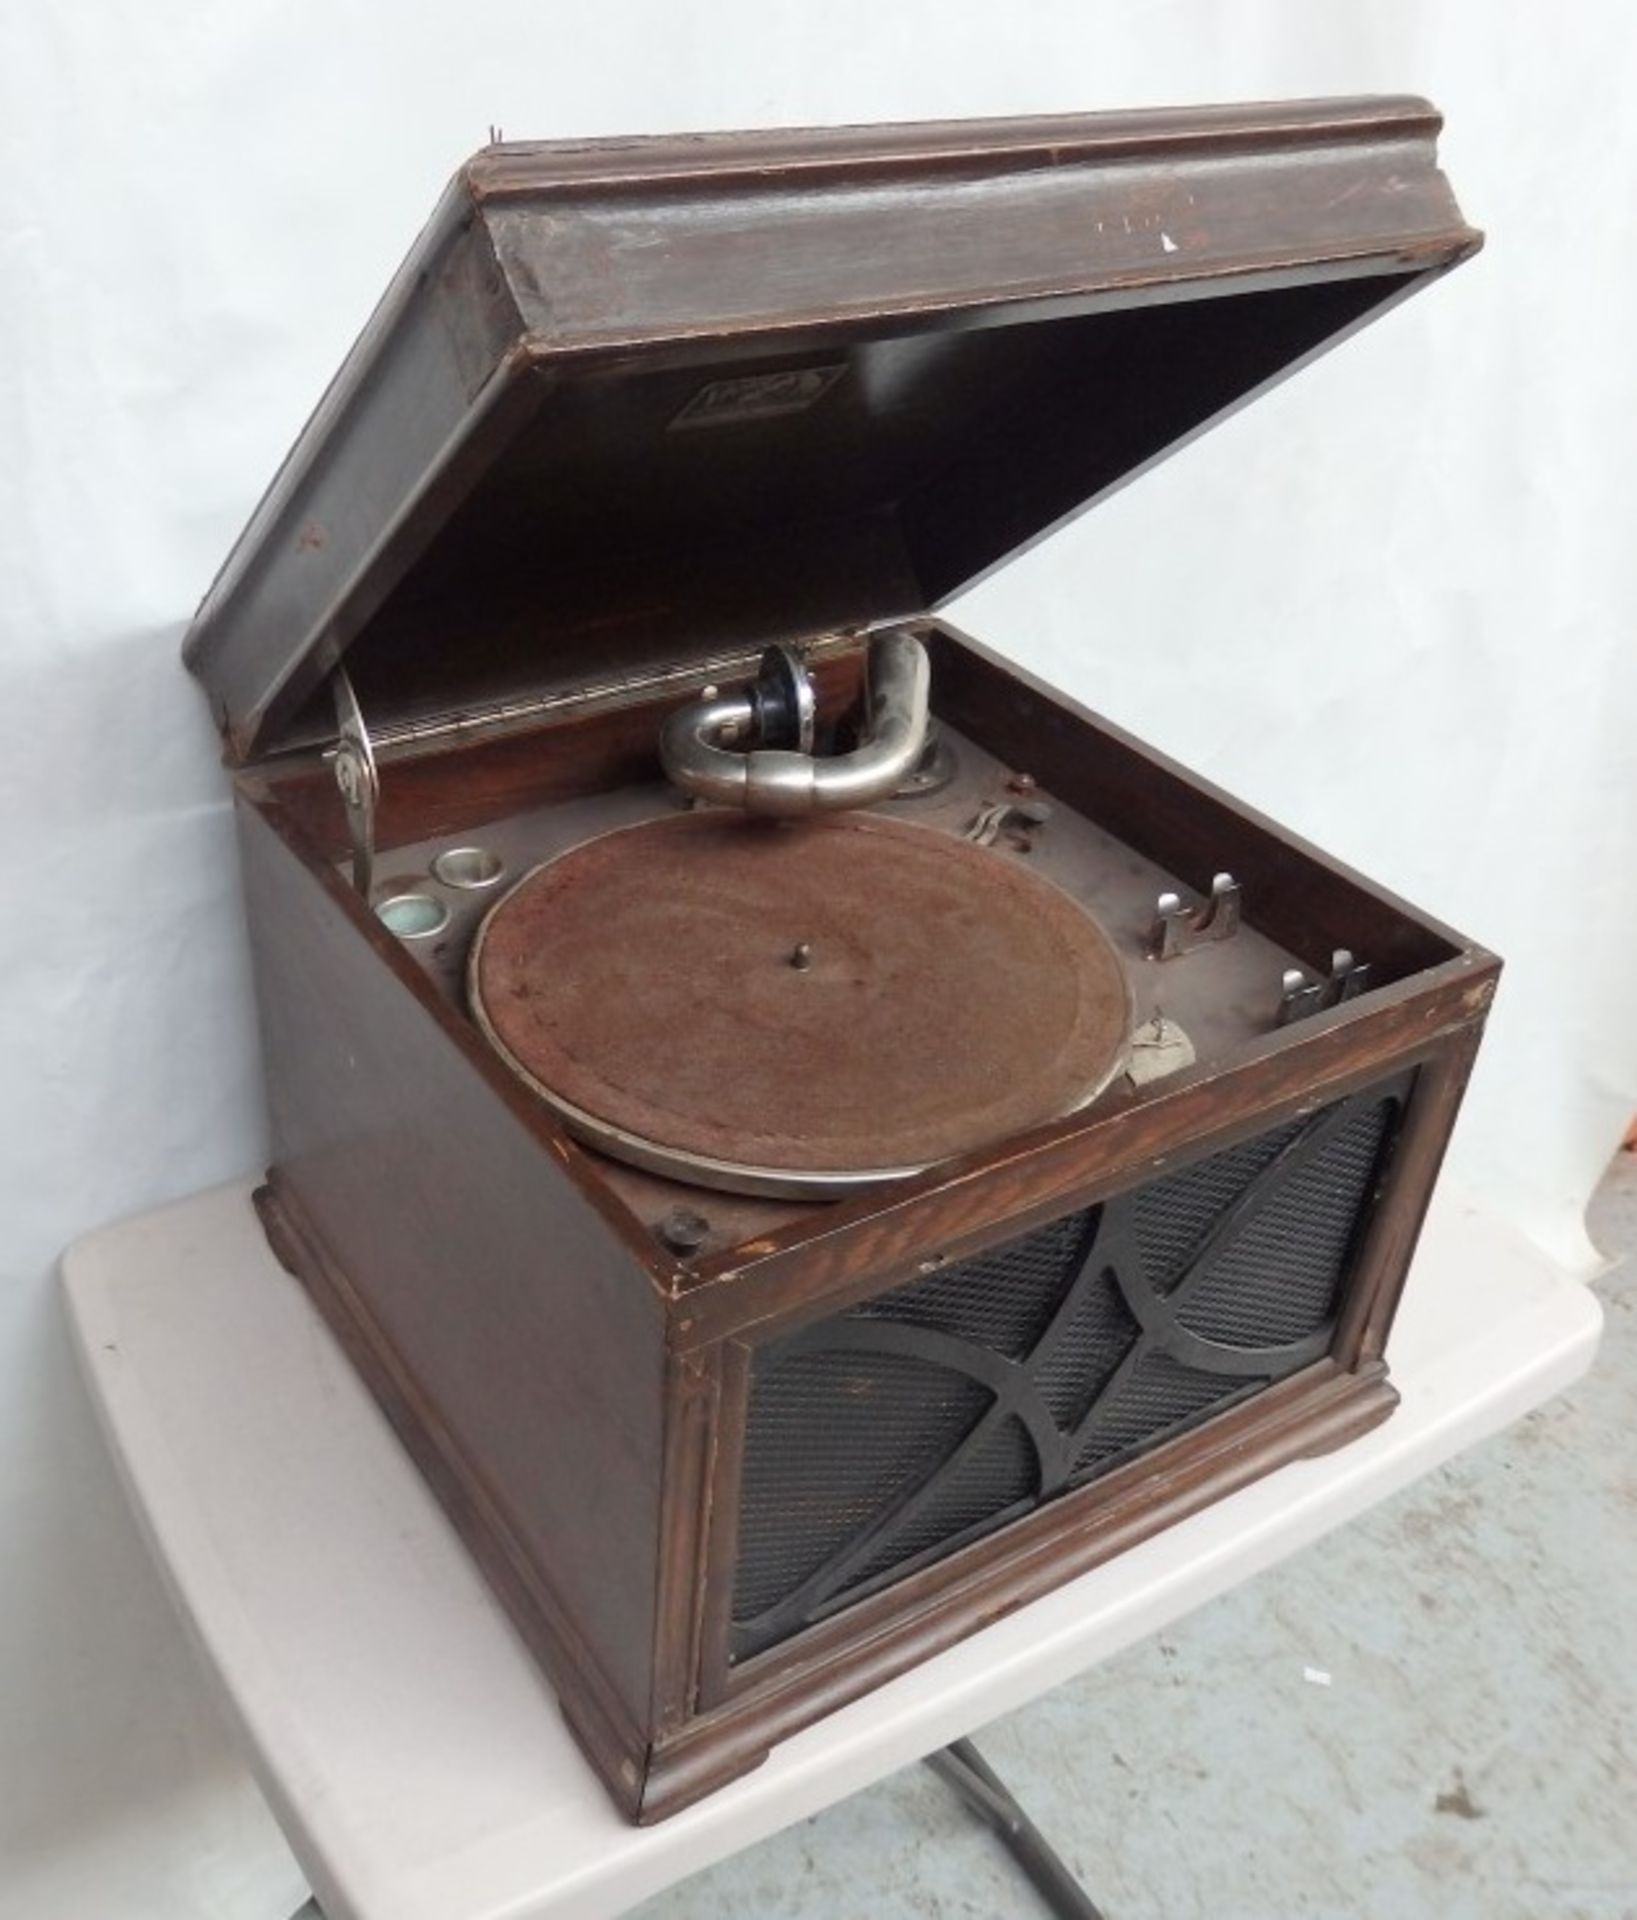 1 x Antique Victor Victrola "Talking Machine" Cabinet Gramophone (Circa 1917) - Crank Operated - - Image 5 of 6